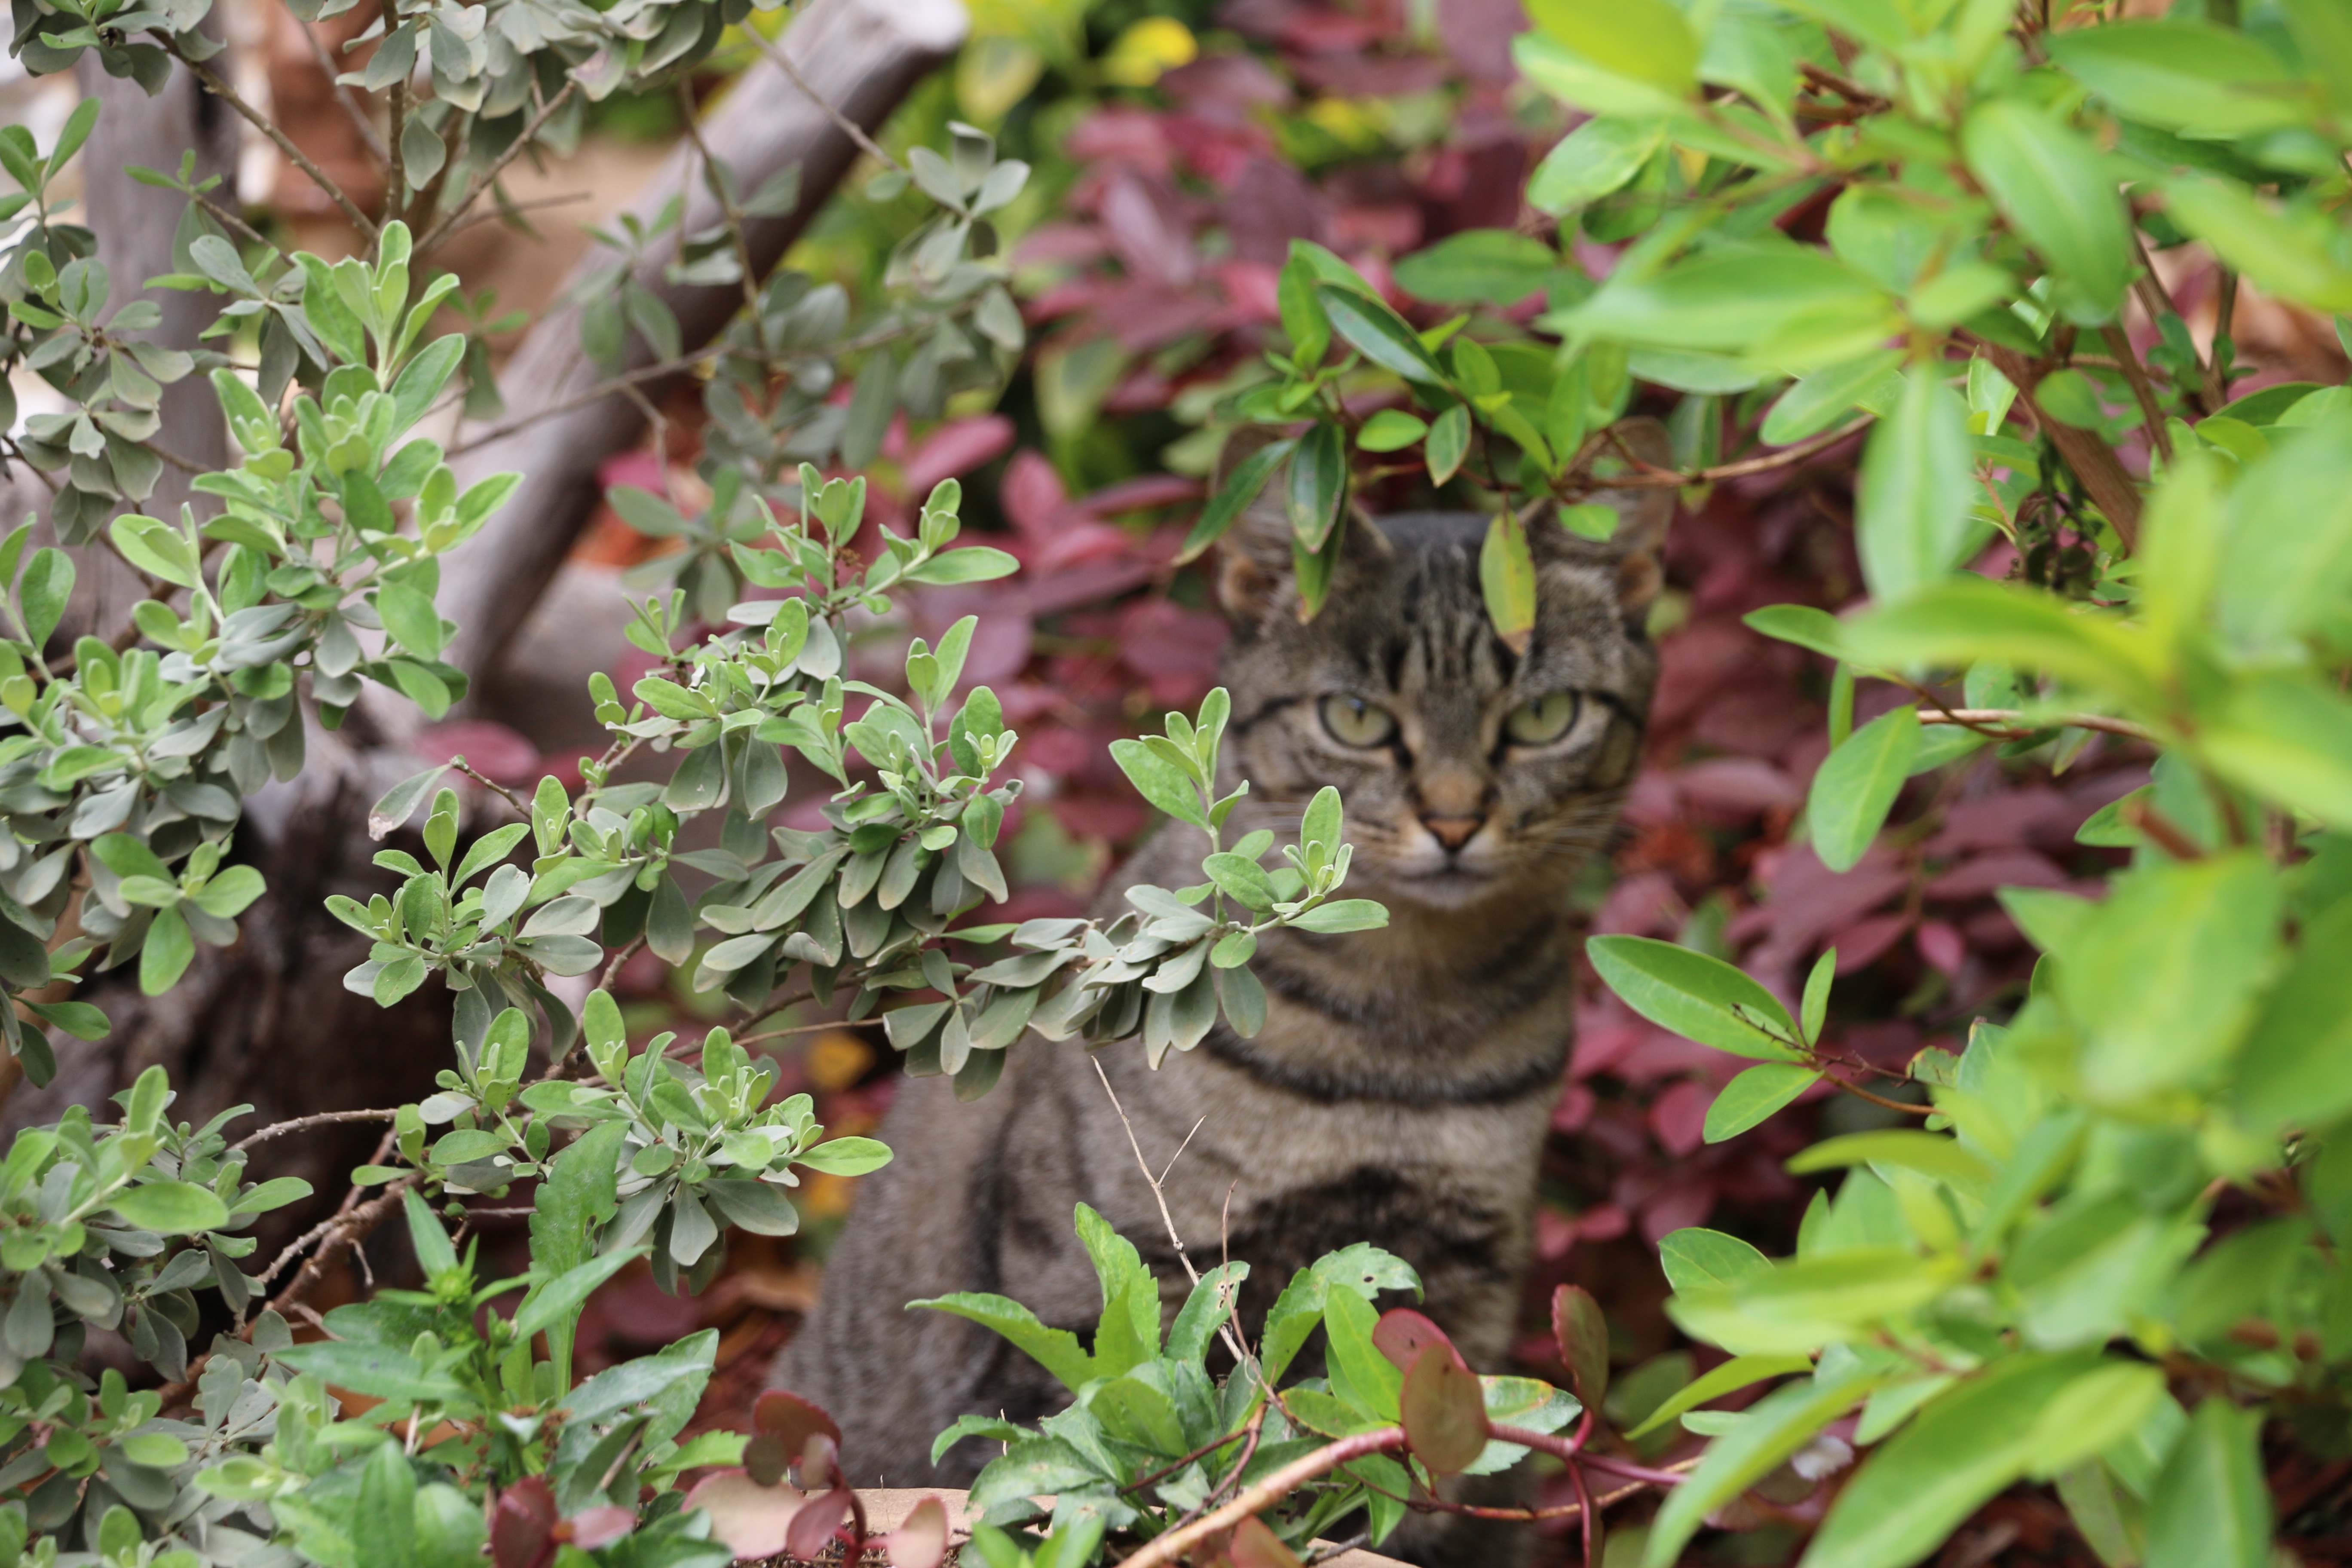 This is Hollye's cat sitting under a bush near Hollye's front door.